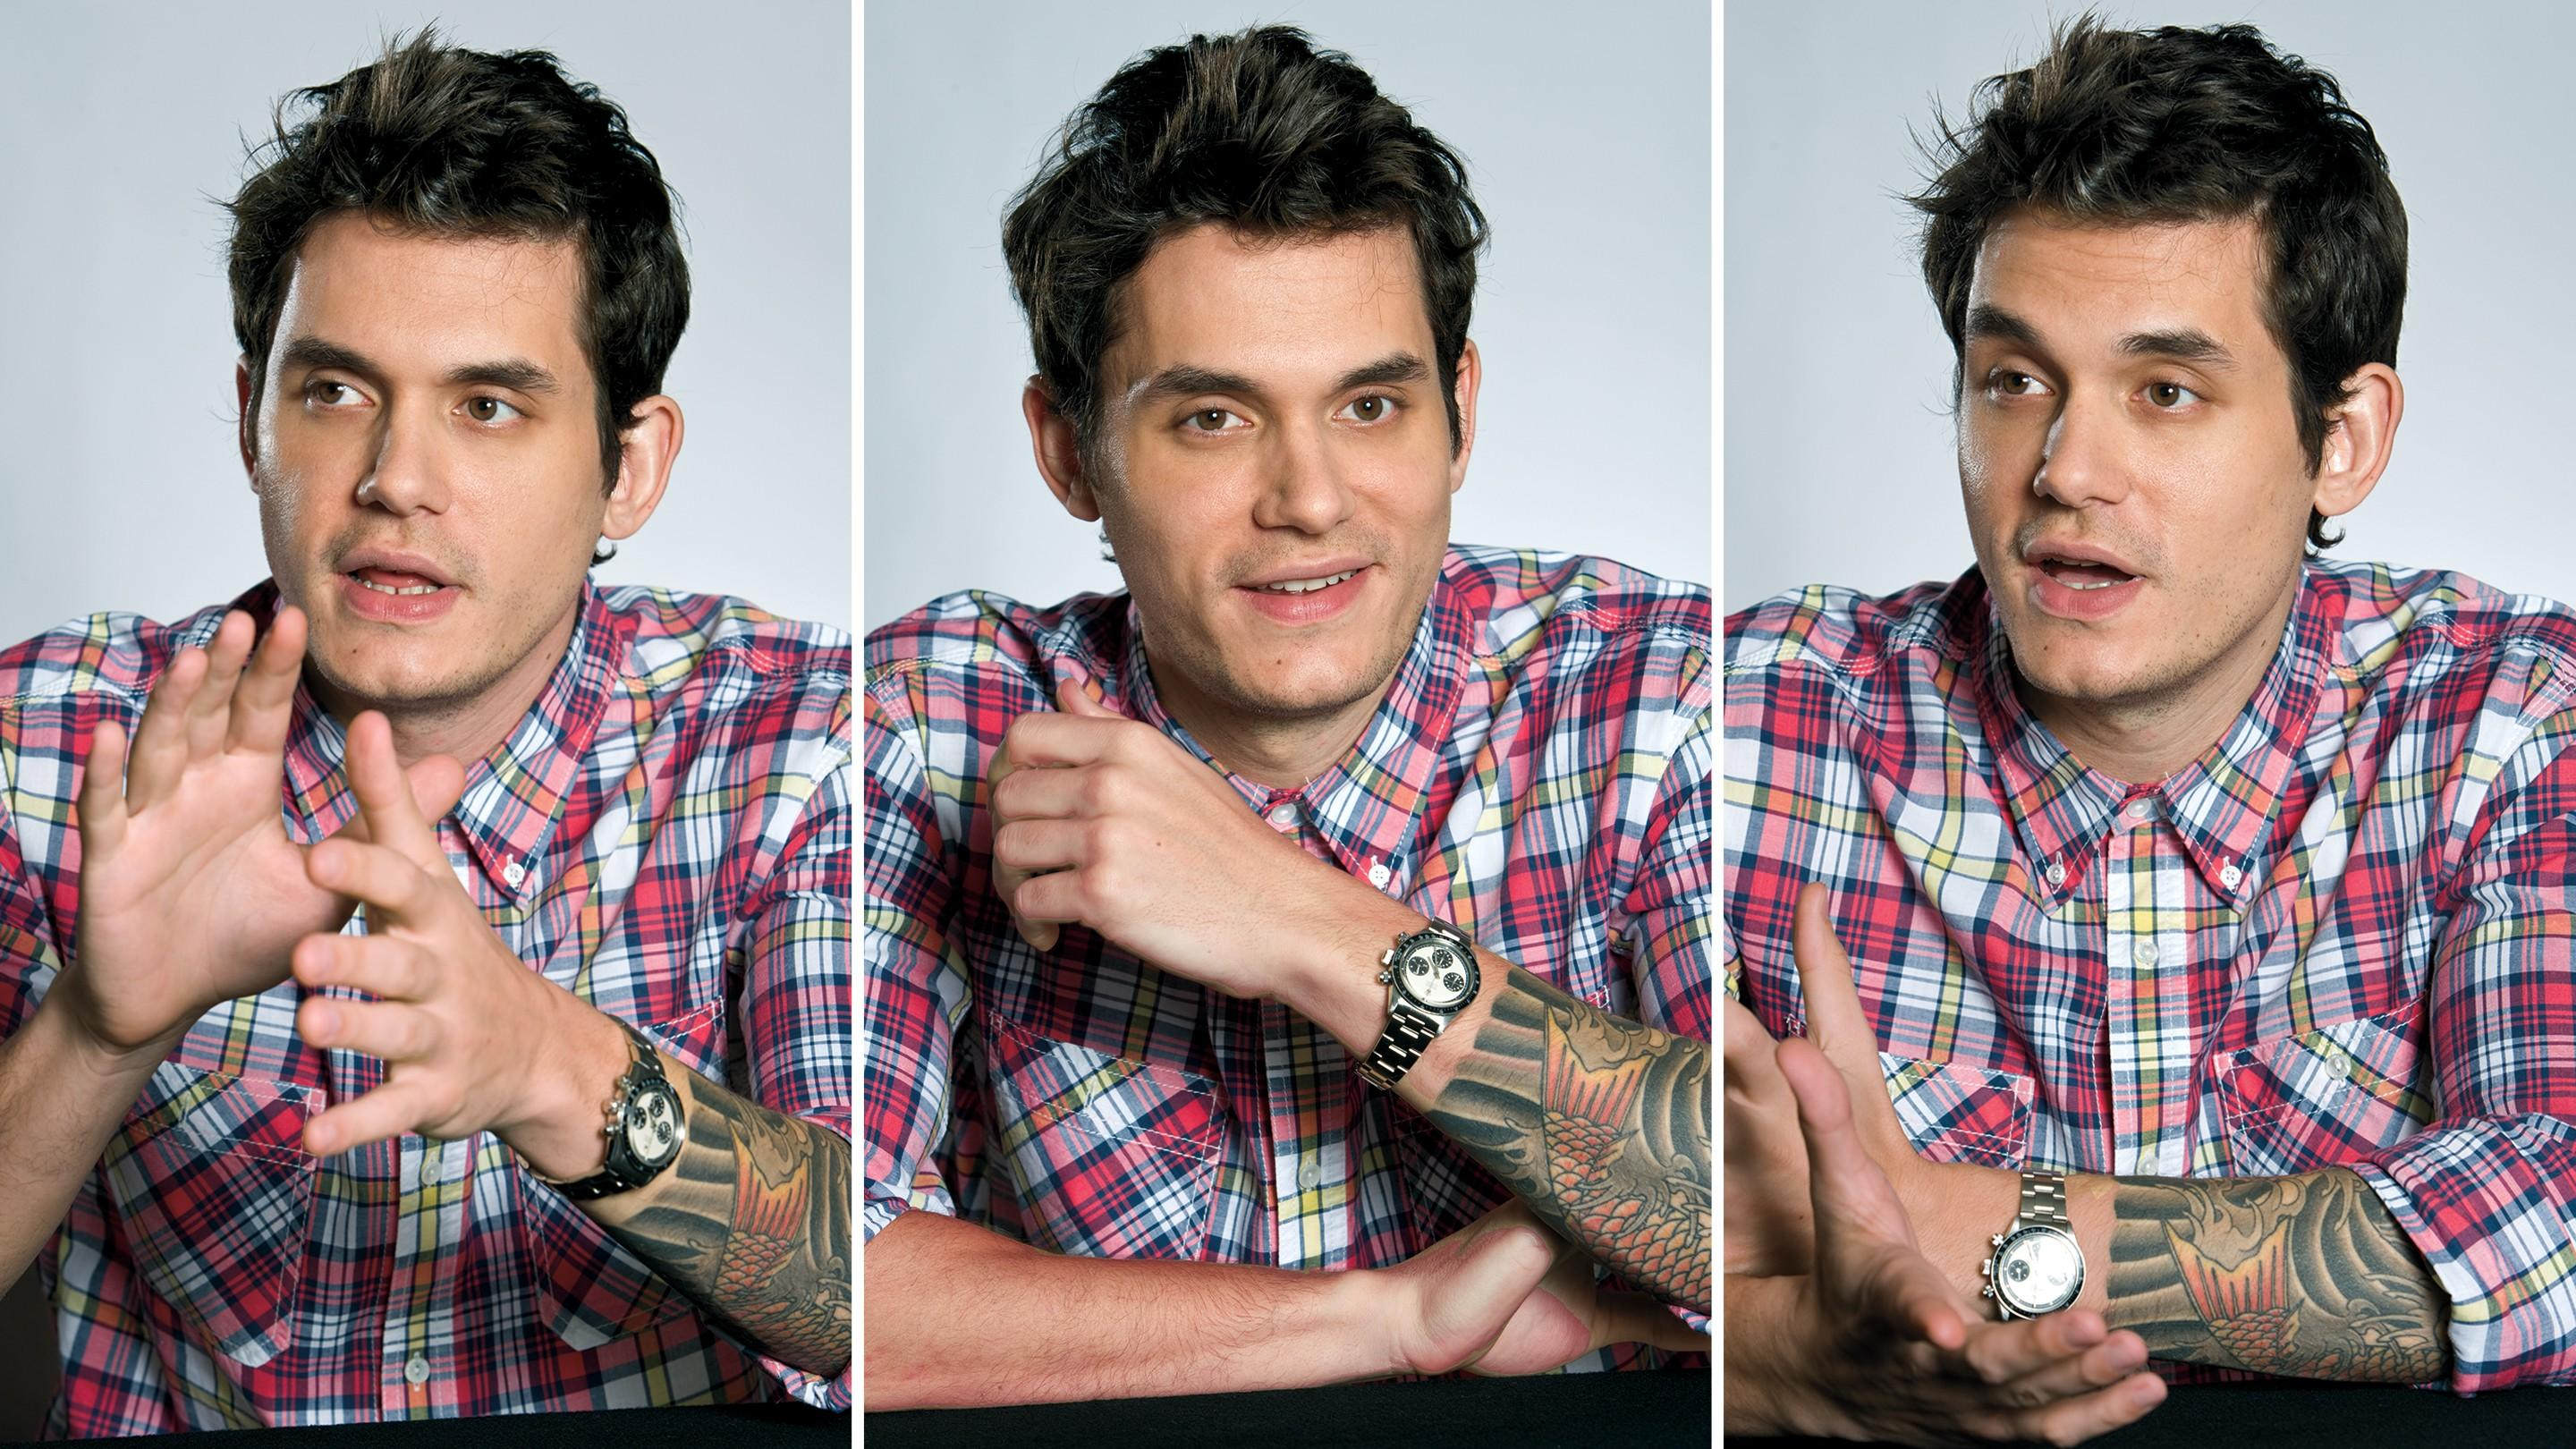 John Mayer on Jessica Simspon, Jennifer Aniston, and Why the Best Sex Happens Alone